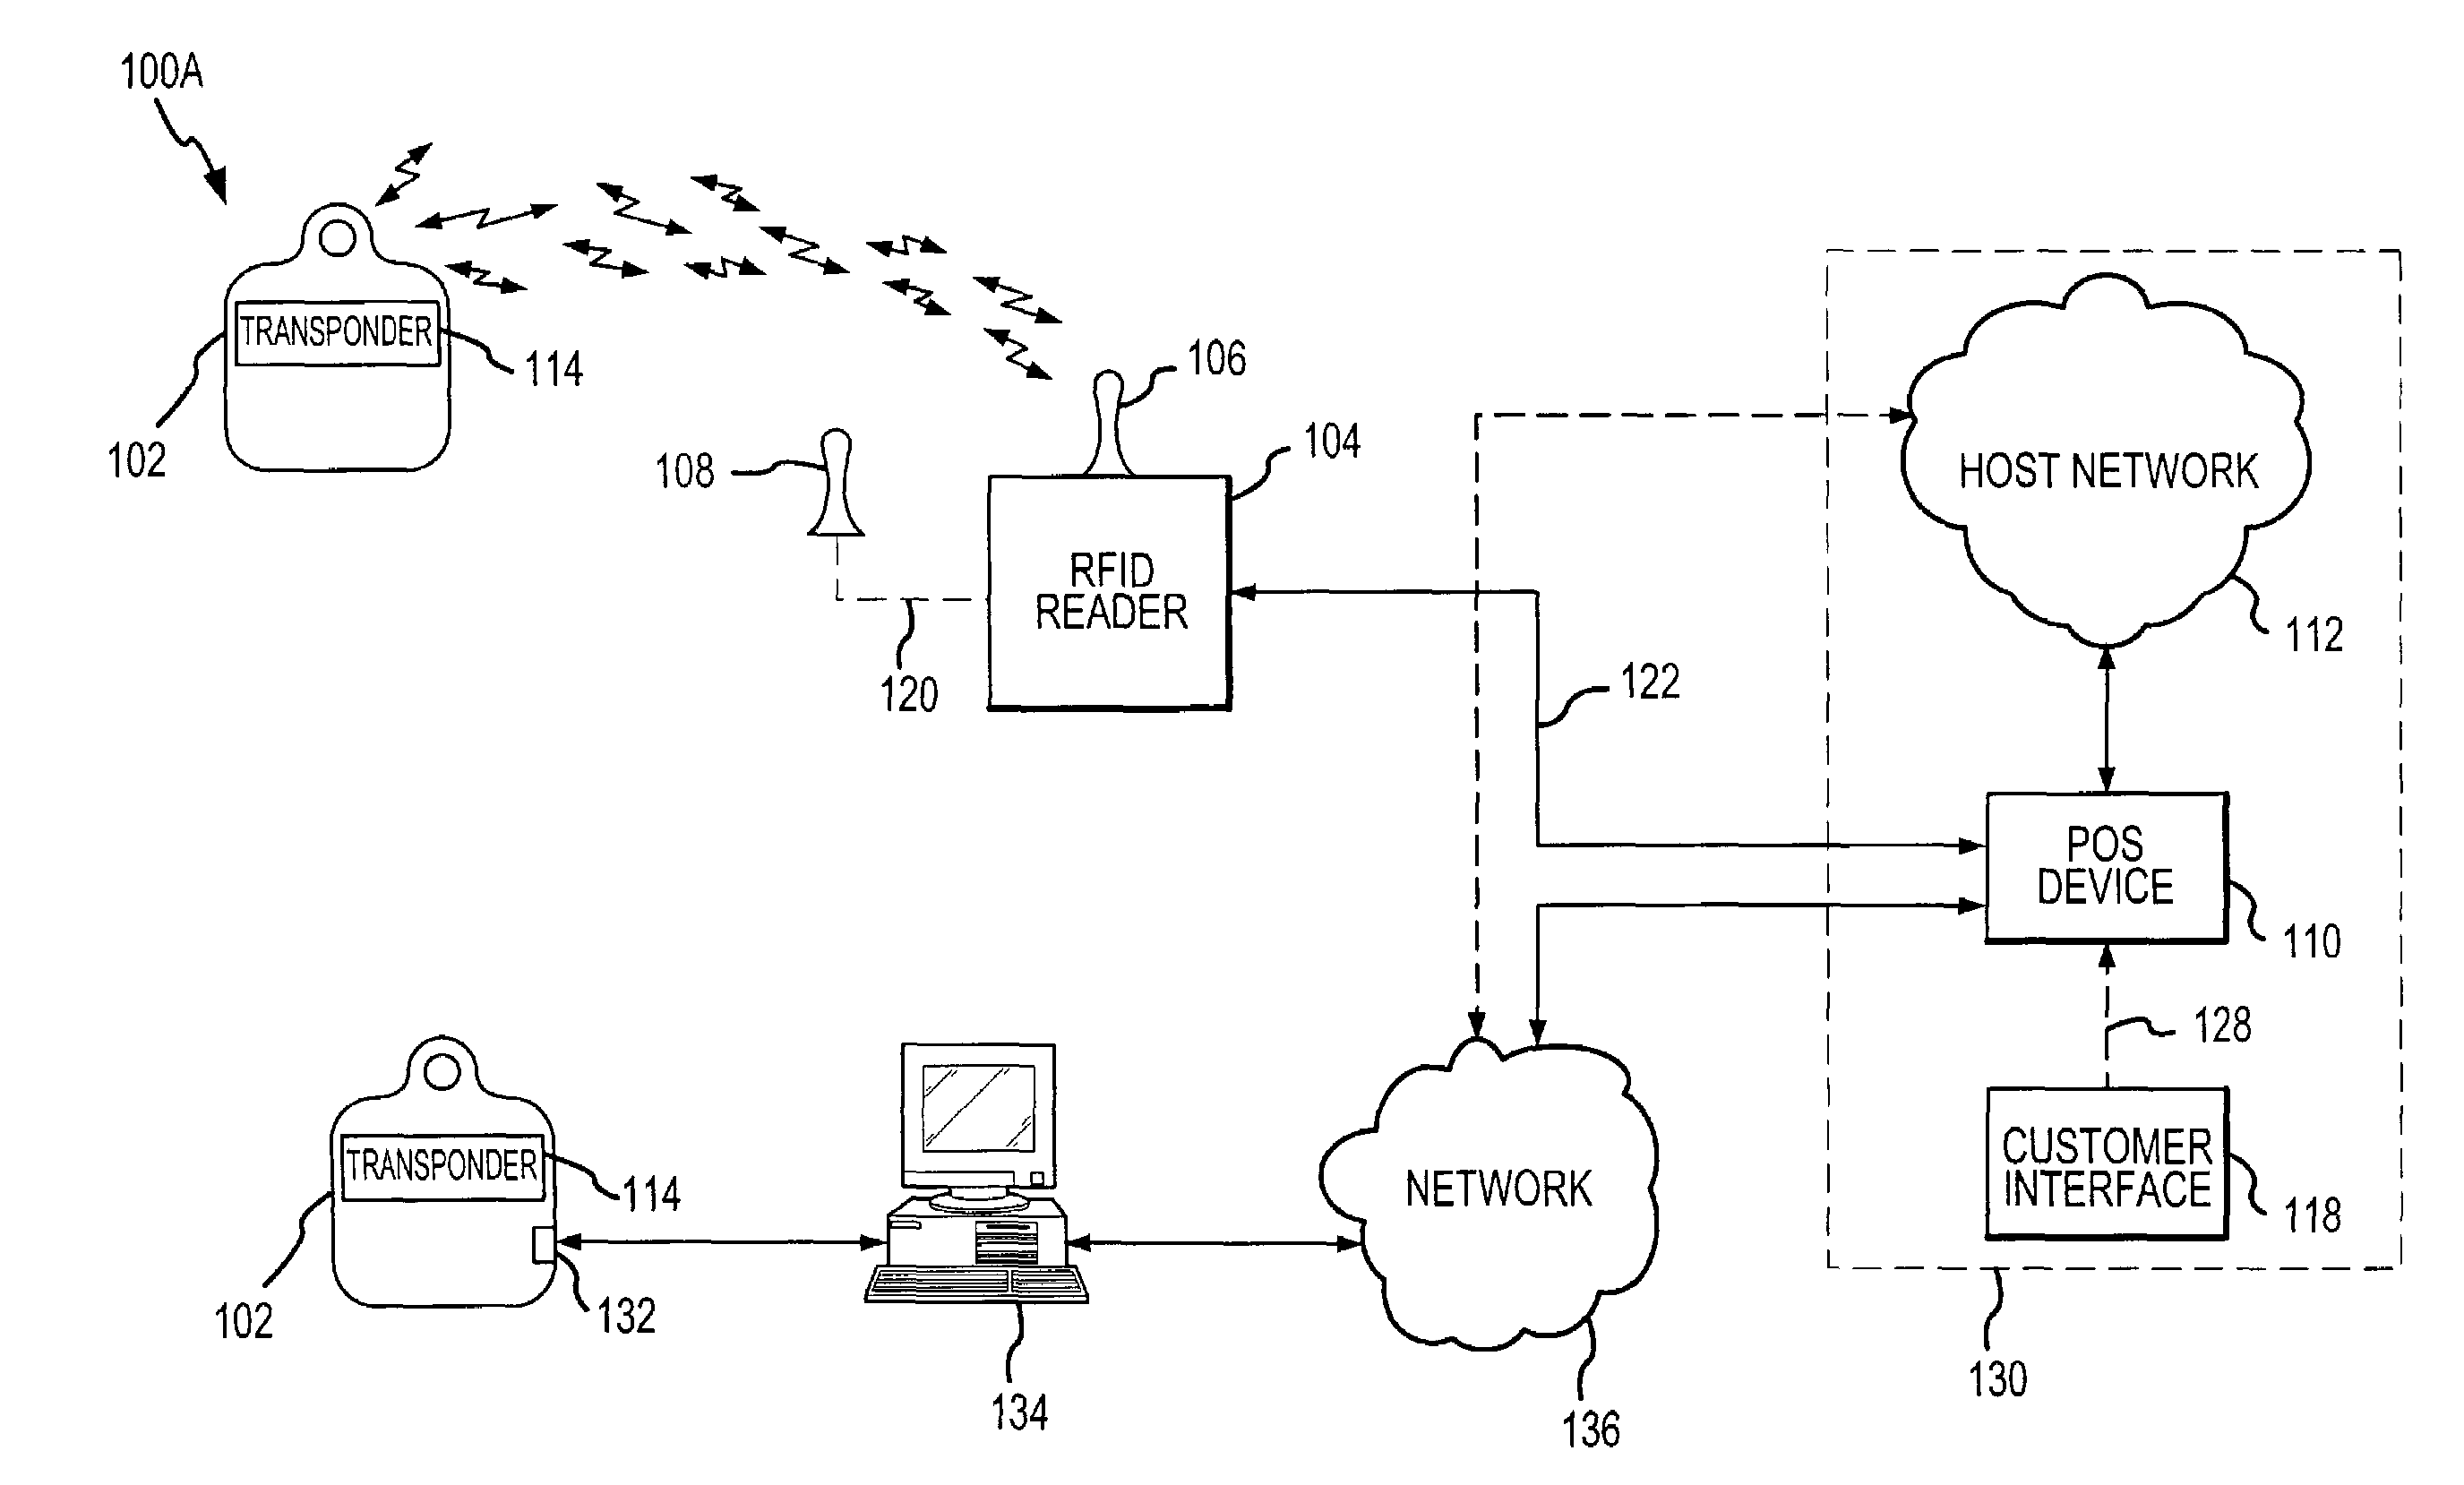 System and method for payment using radio frequency identification in contact and contactless transactions